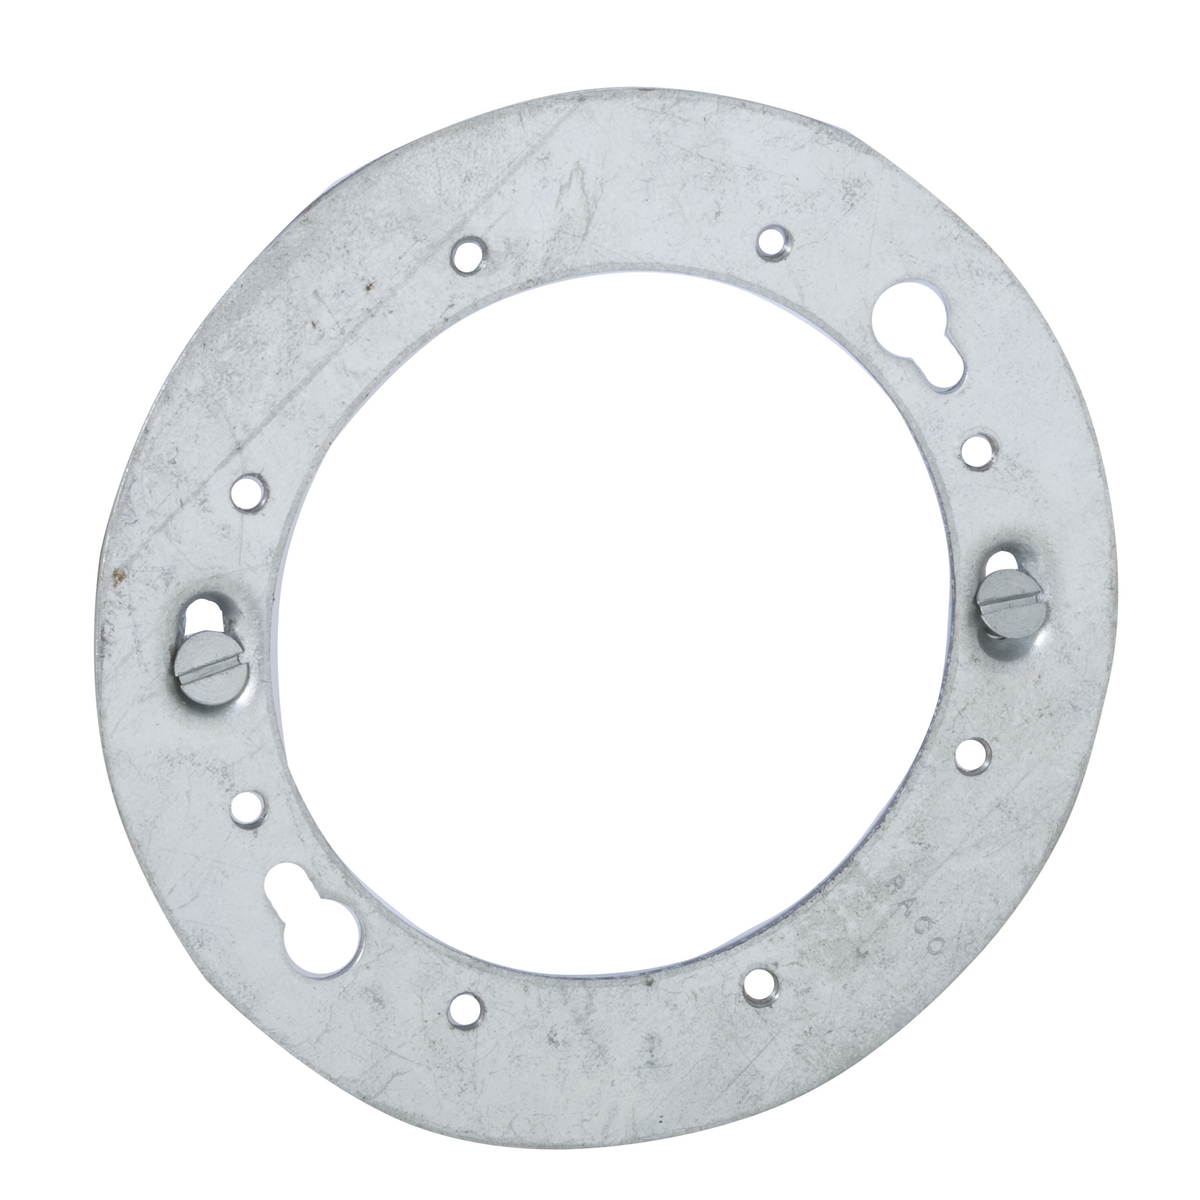 CONCRETE ADAPTER RING